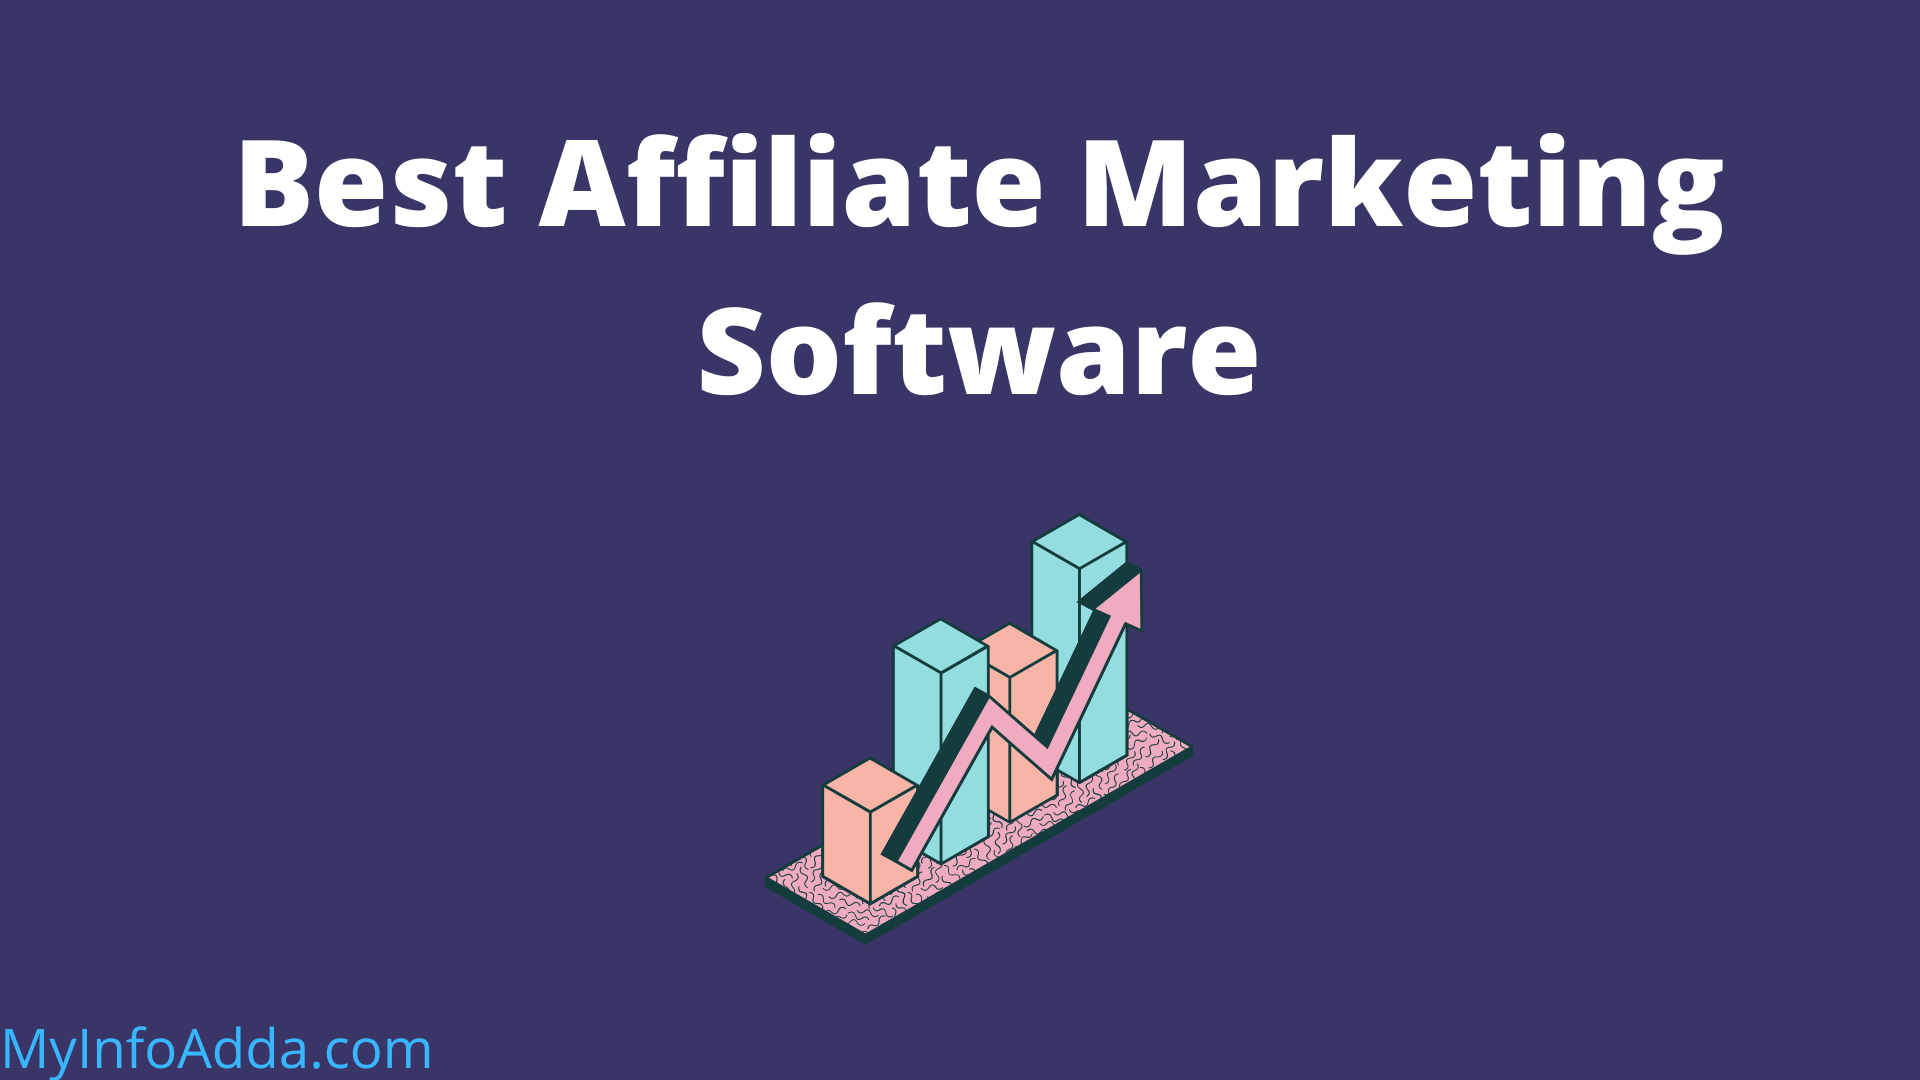 Best Affiliate Marketing Software To Boost Sales & Revenue